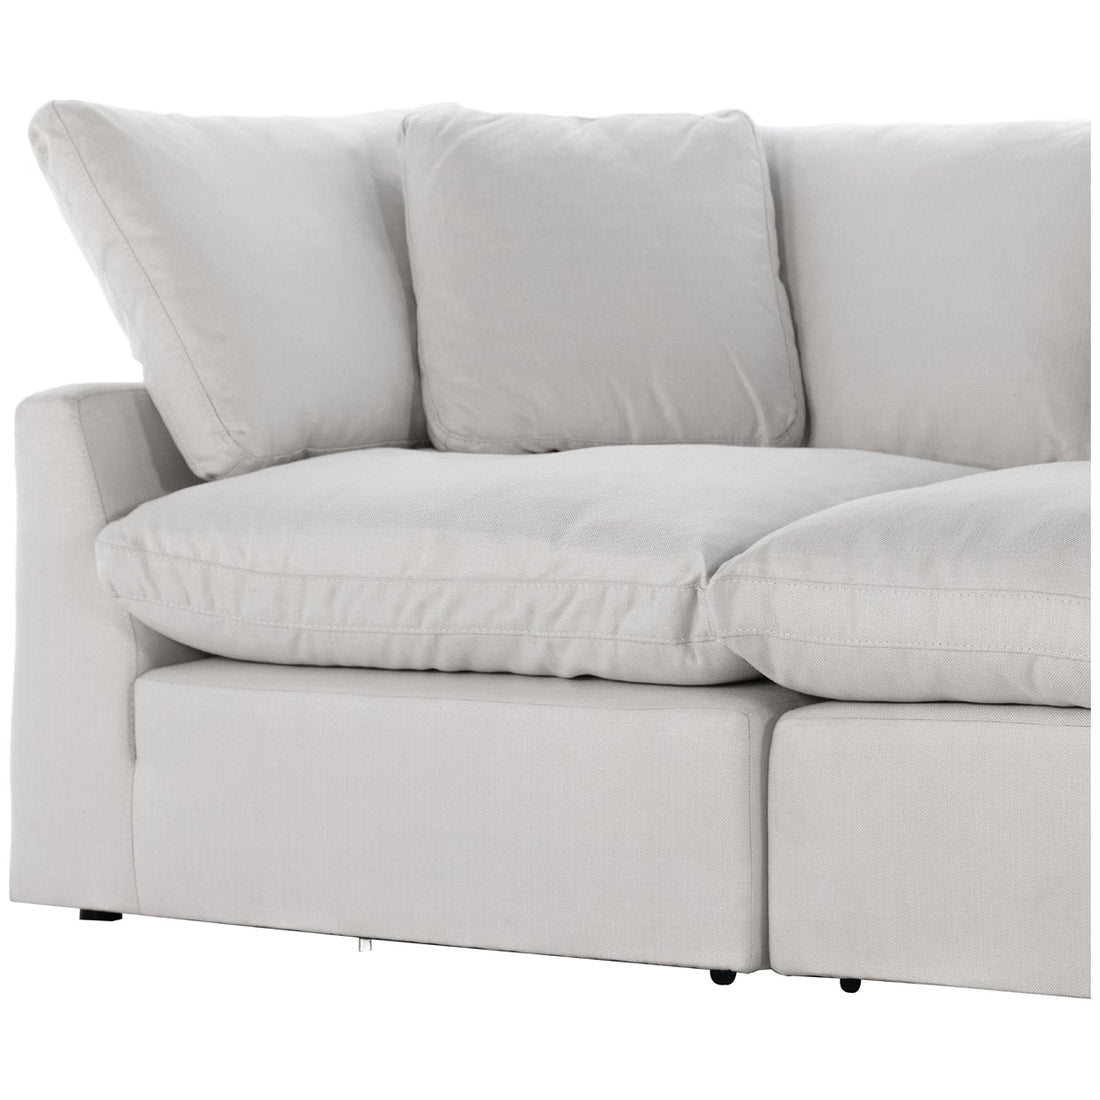 Four Hands Centrale Stevie 2-Piece Sectional - Anders Ivory